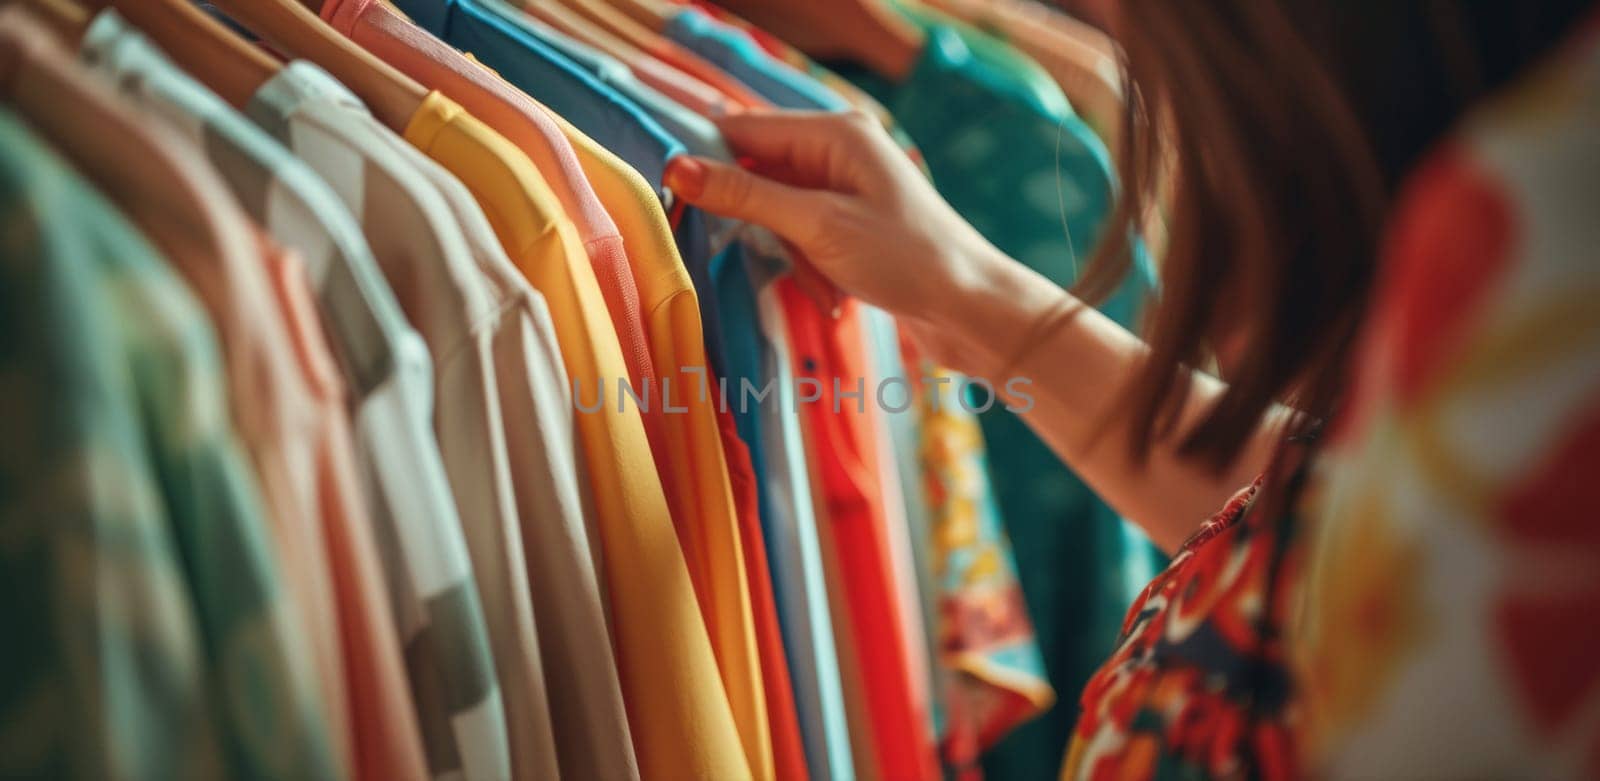 A woman looking at a rack of colorful shirts on hangers